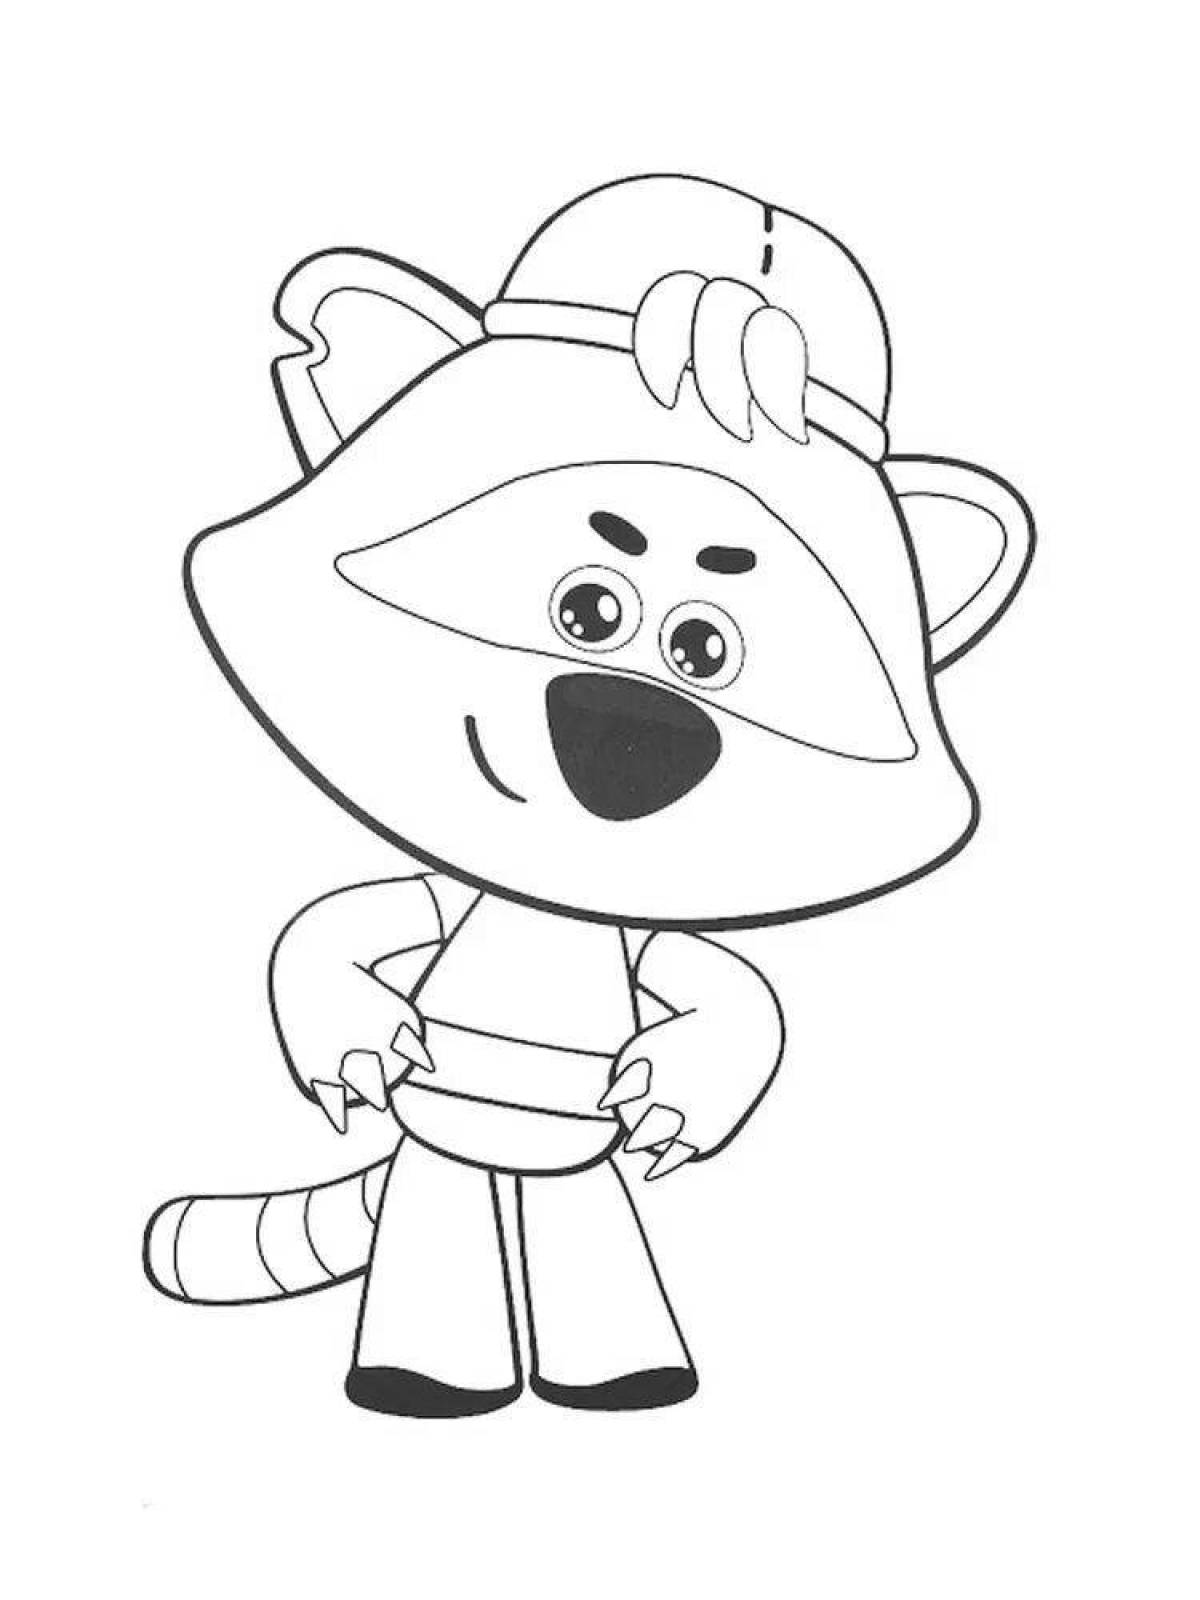 Cozy foxes coloring page